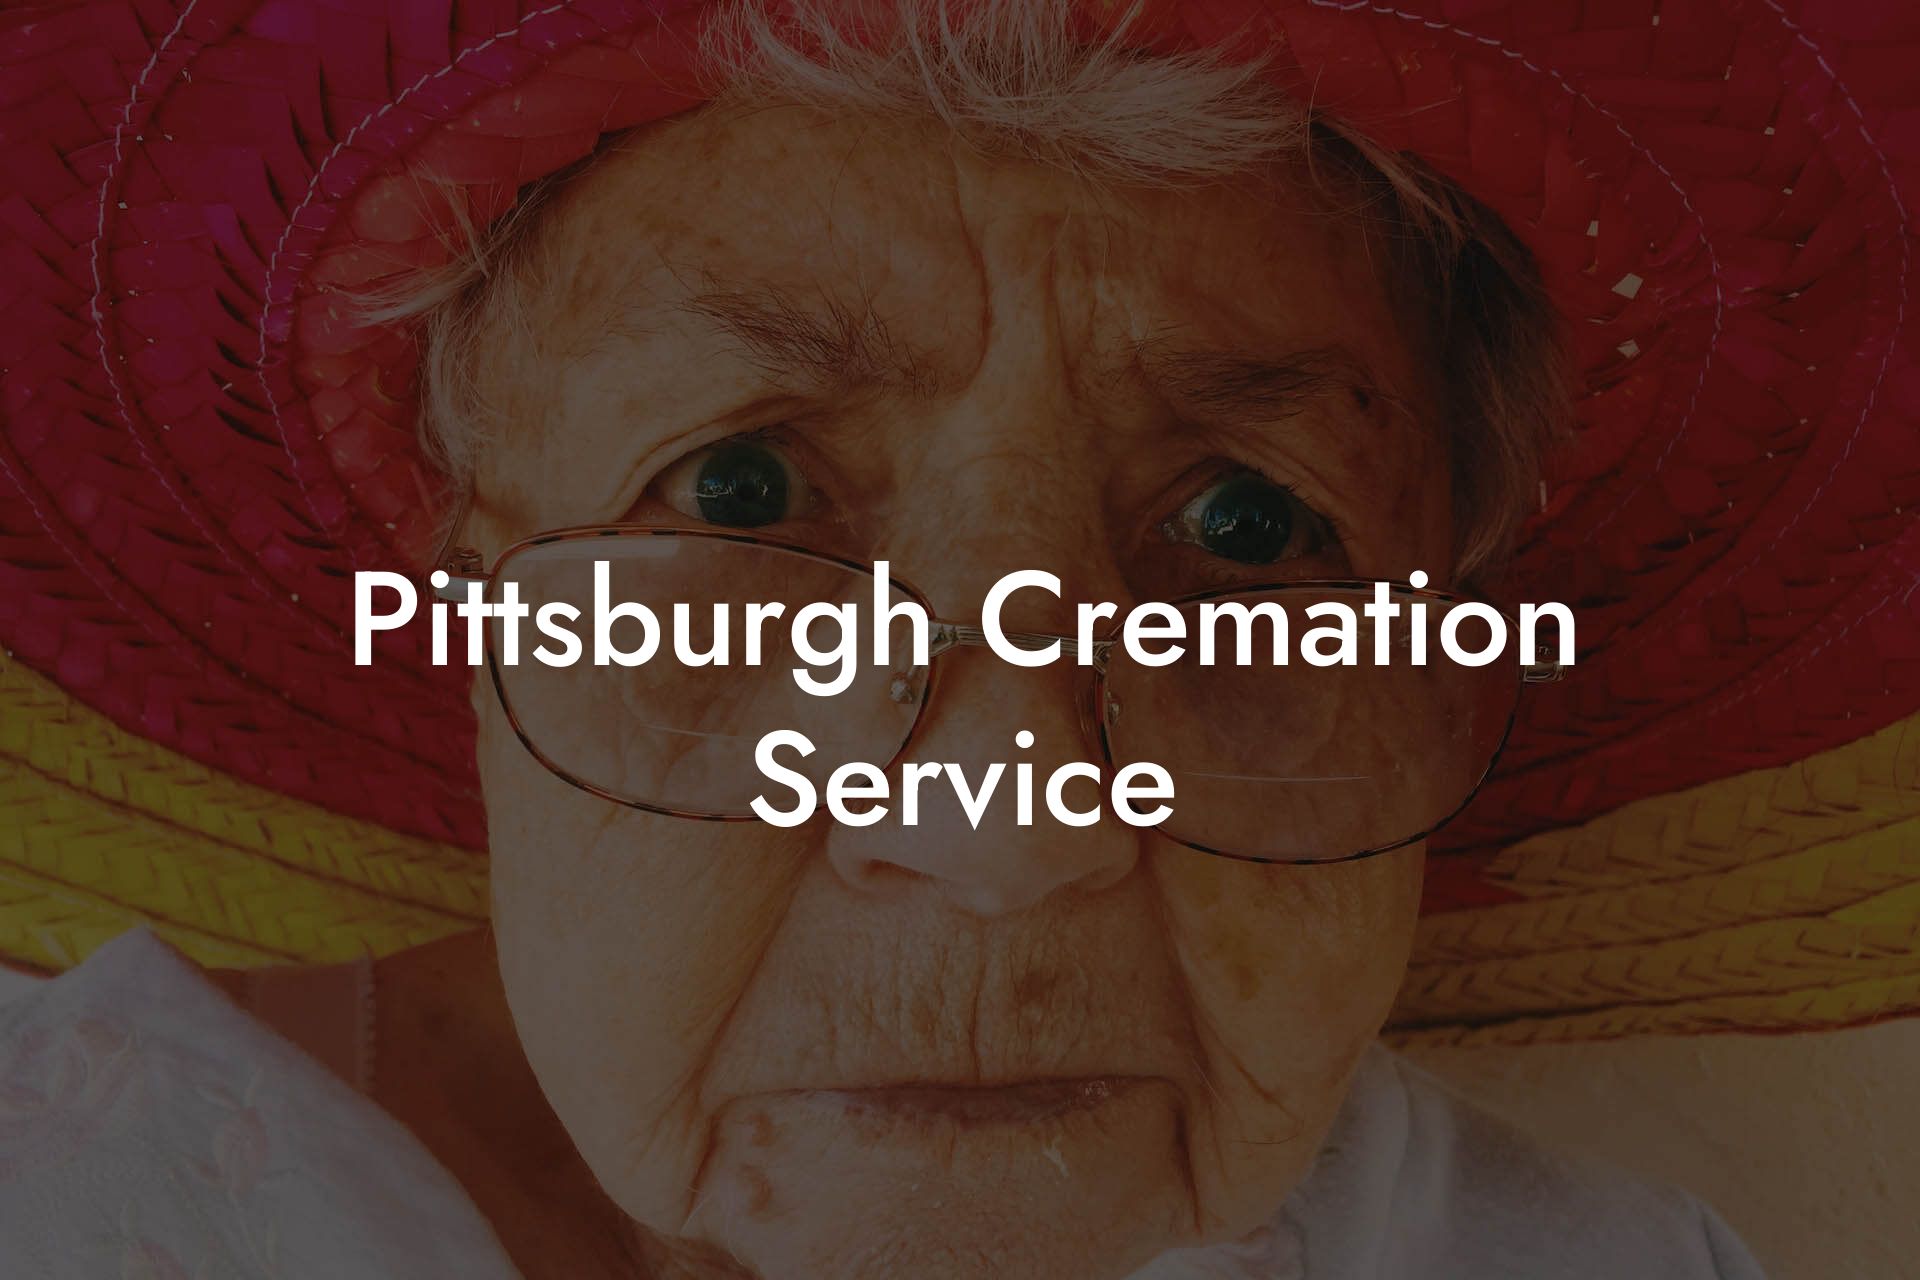 Pittsburgh Cremation Service